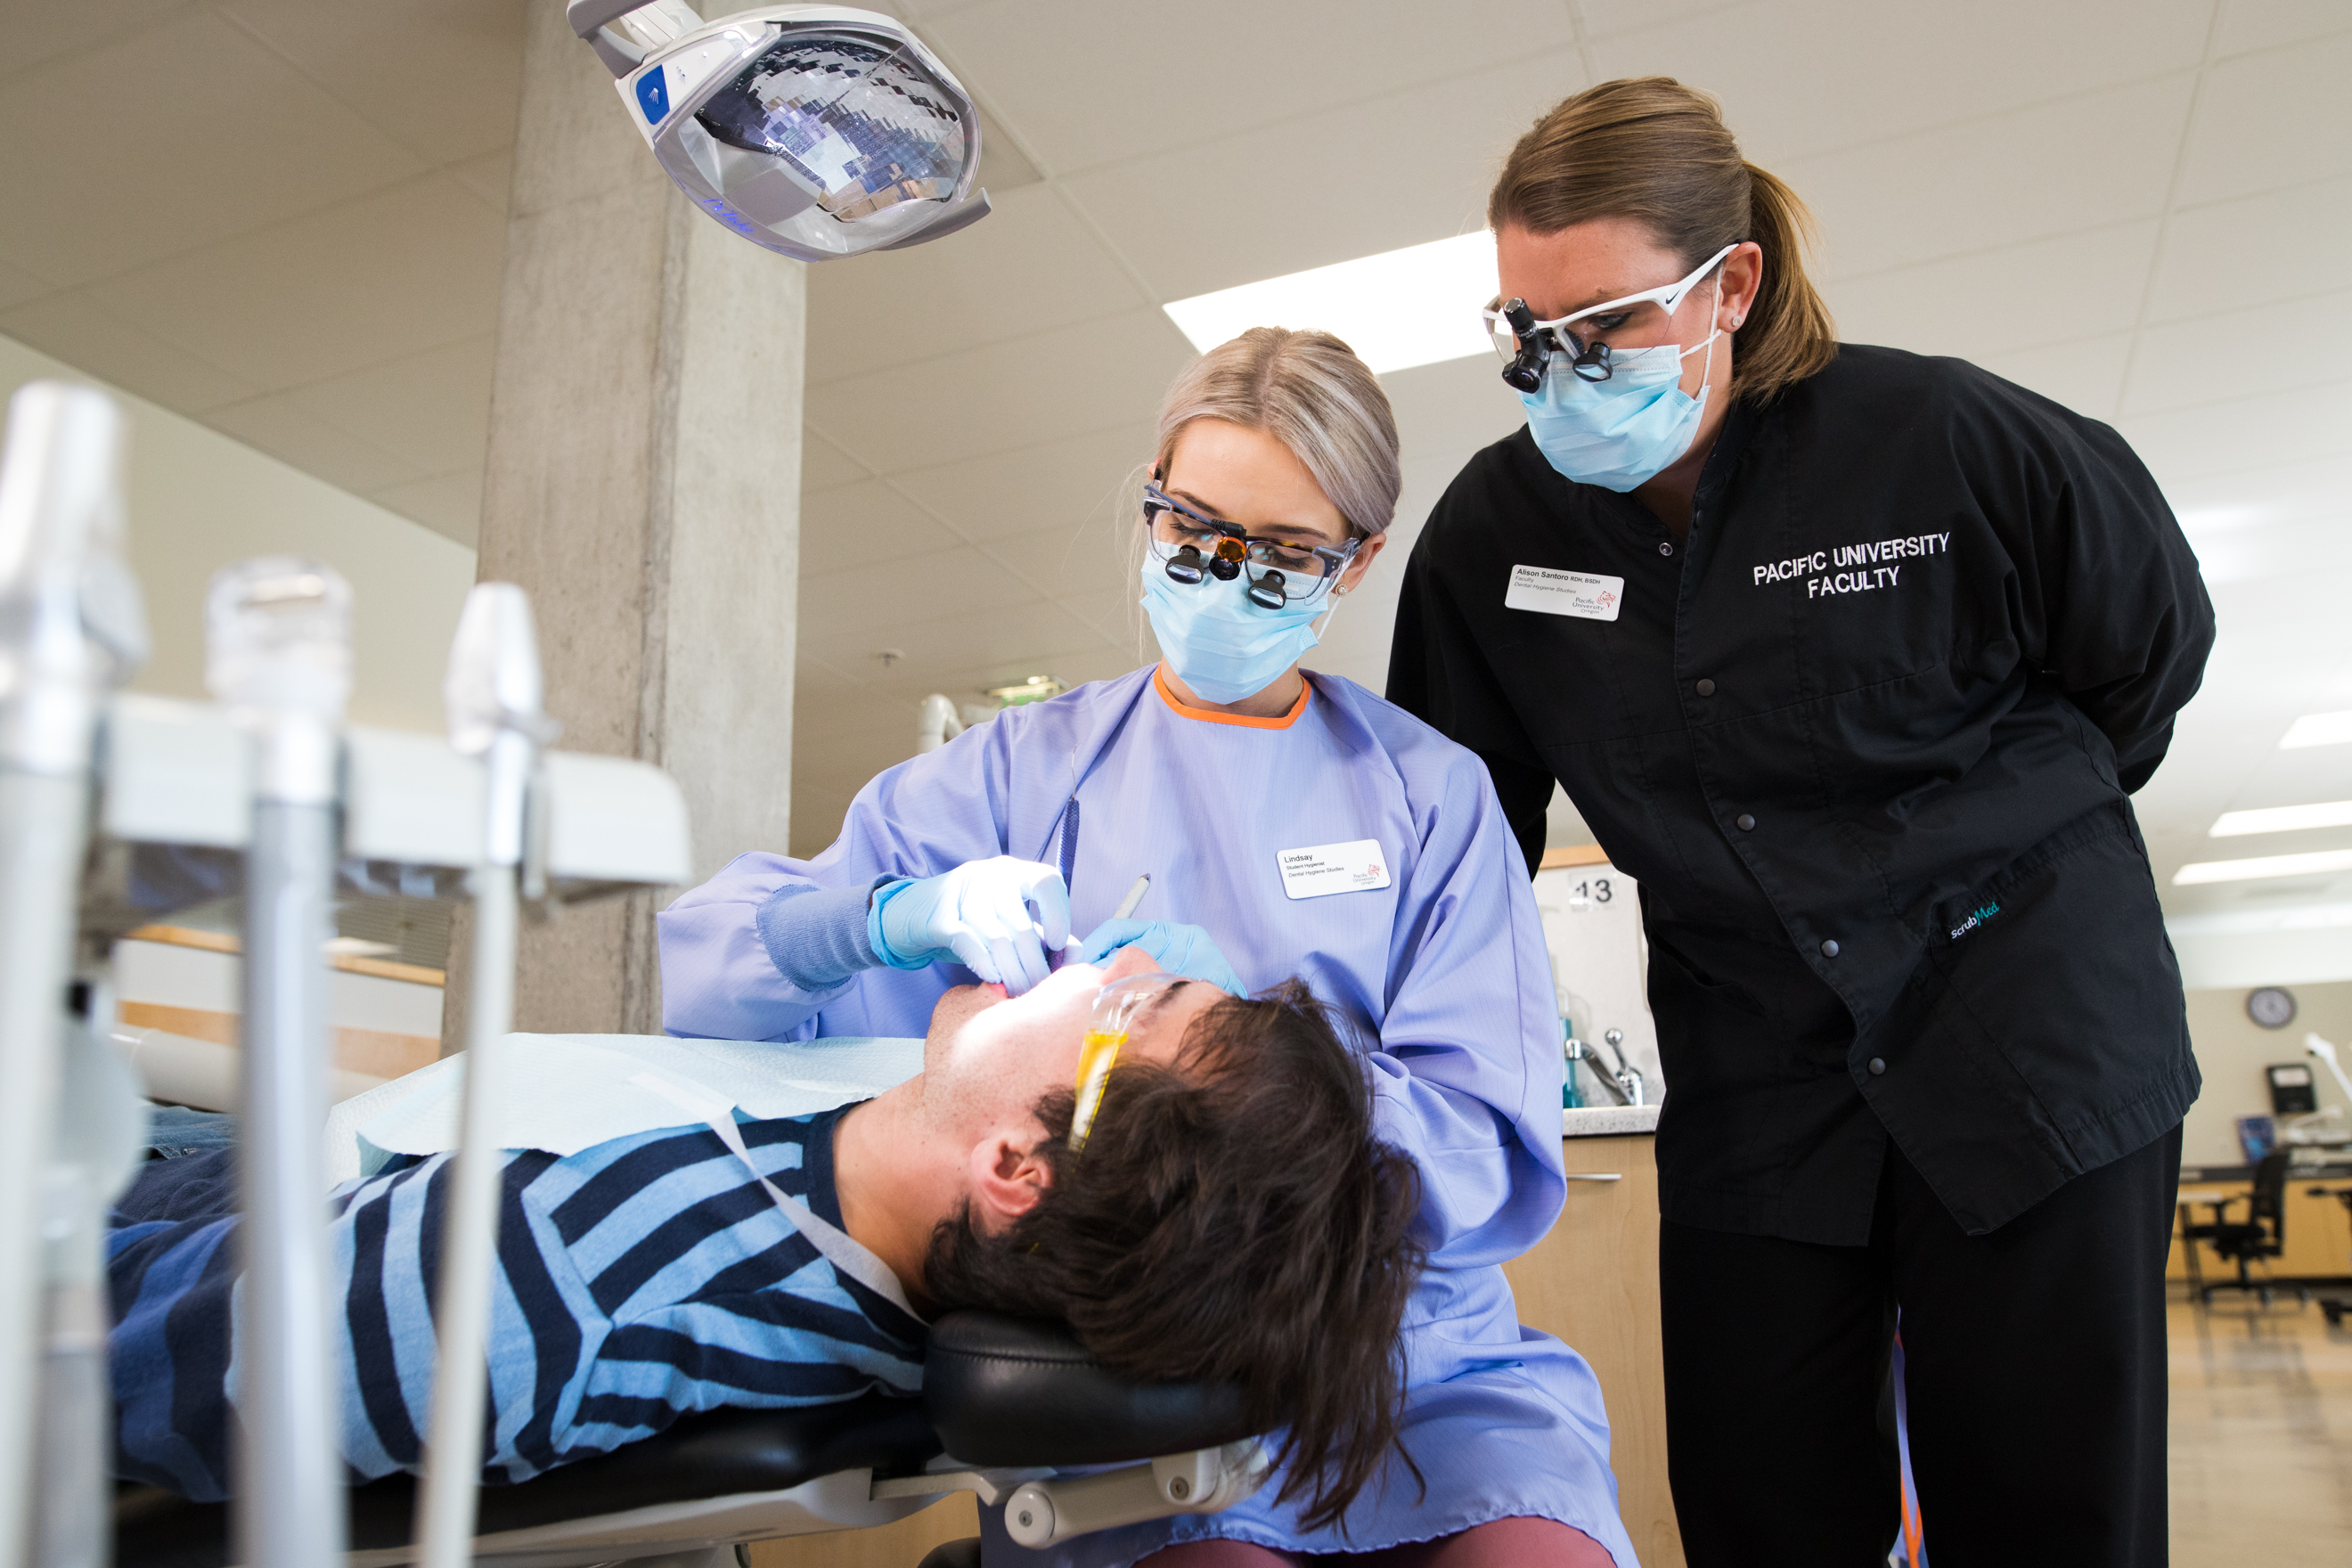 A dental hygiene students cleans a patient's teeth under the supervision of a faculty member.